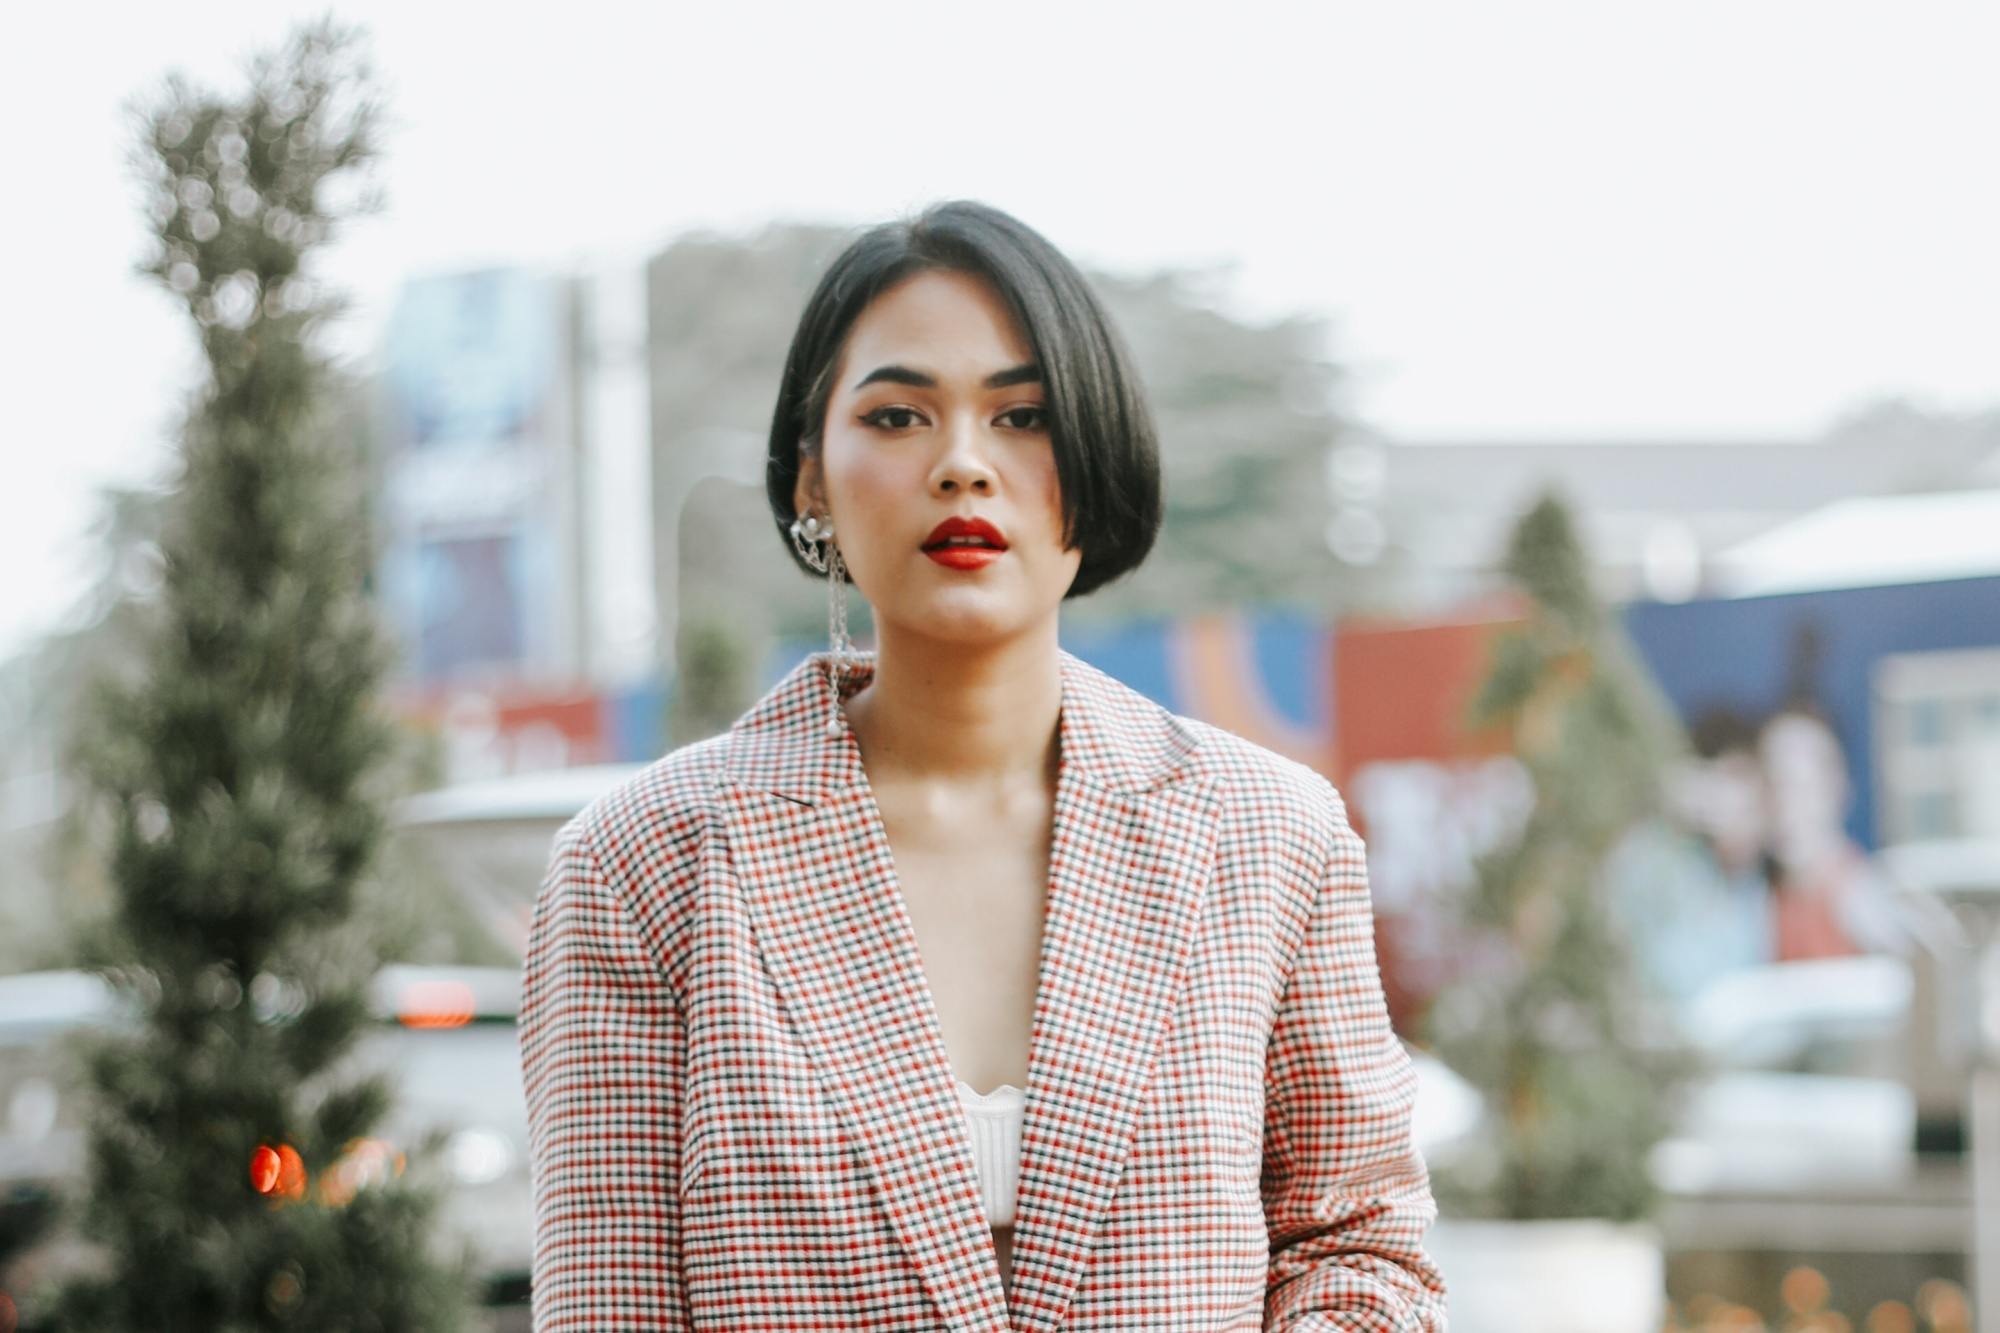 Asian woman with short straight hair wearing a beige jacket